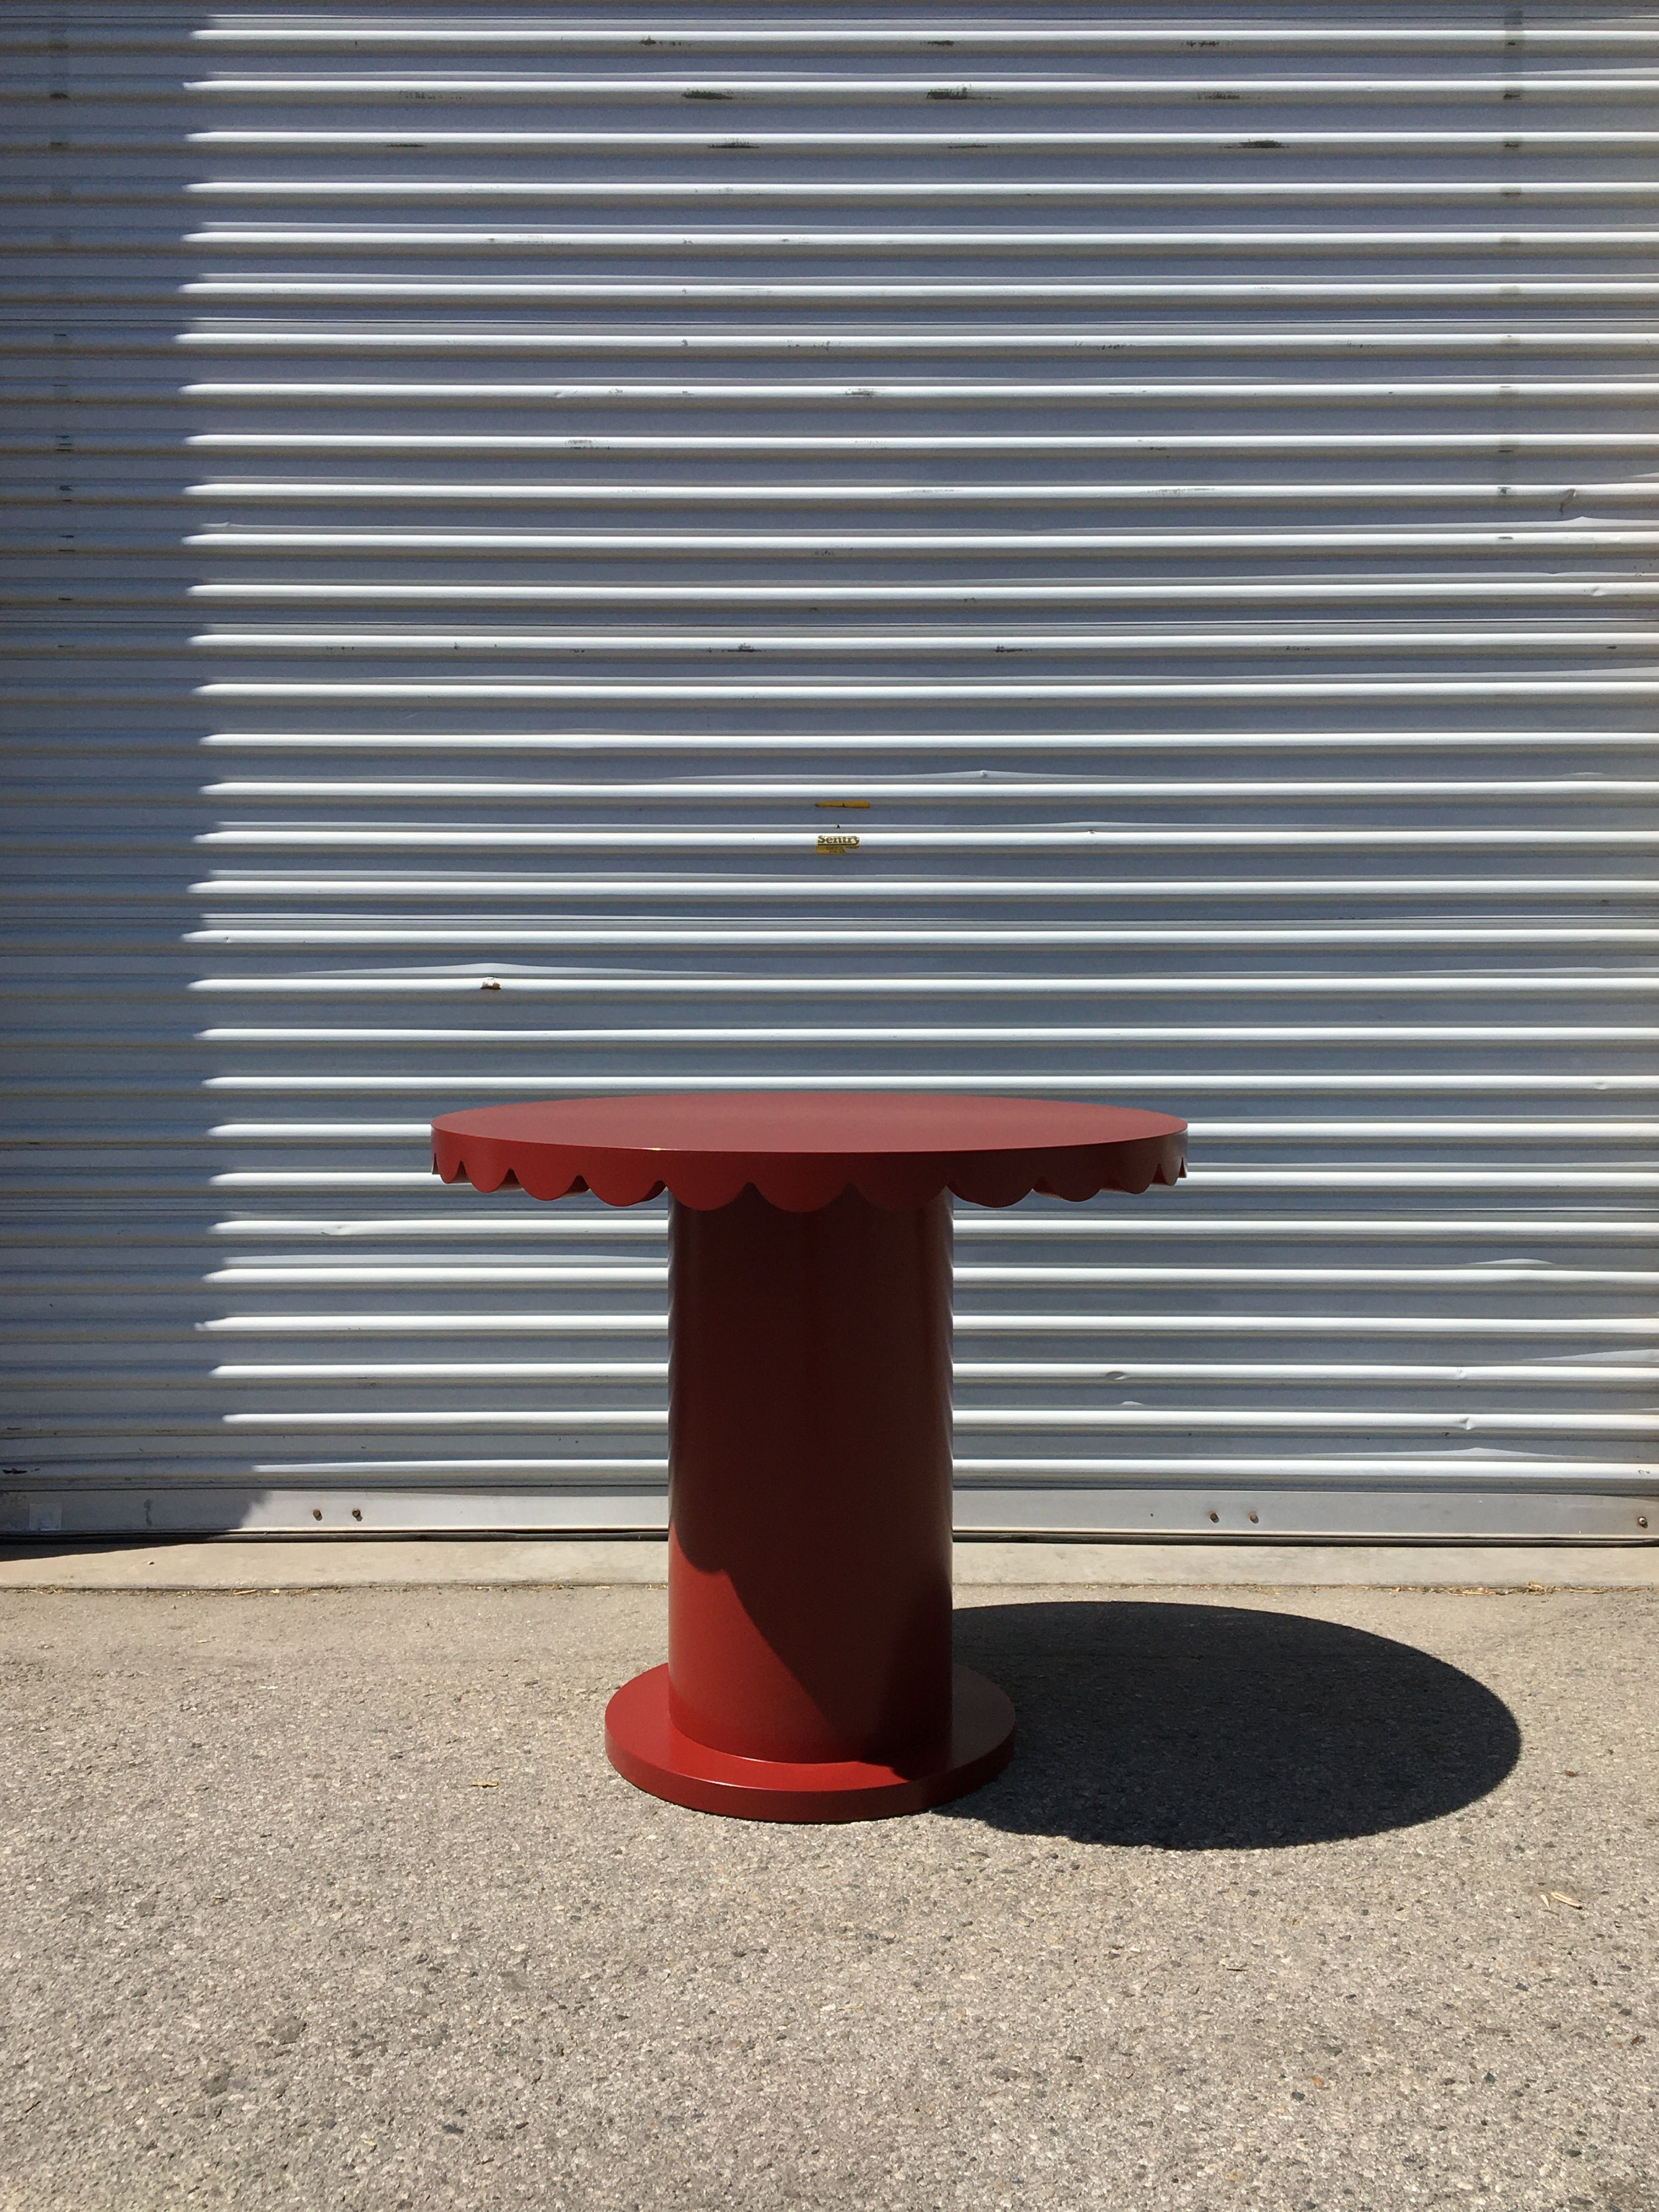  Scallop Skirt Table - red product image 4